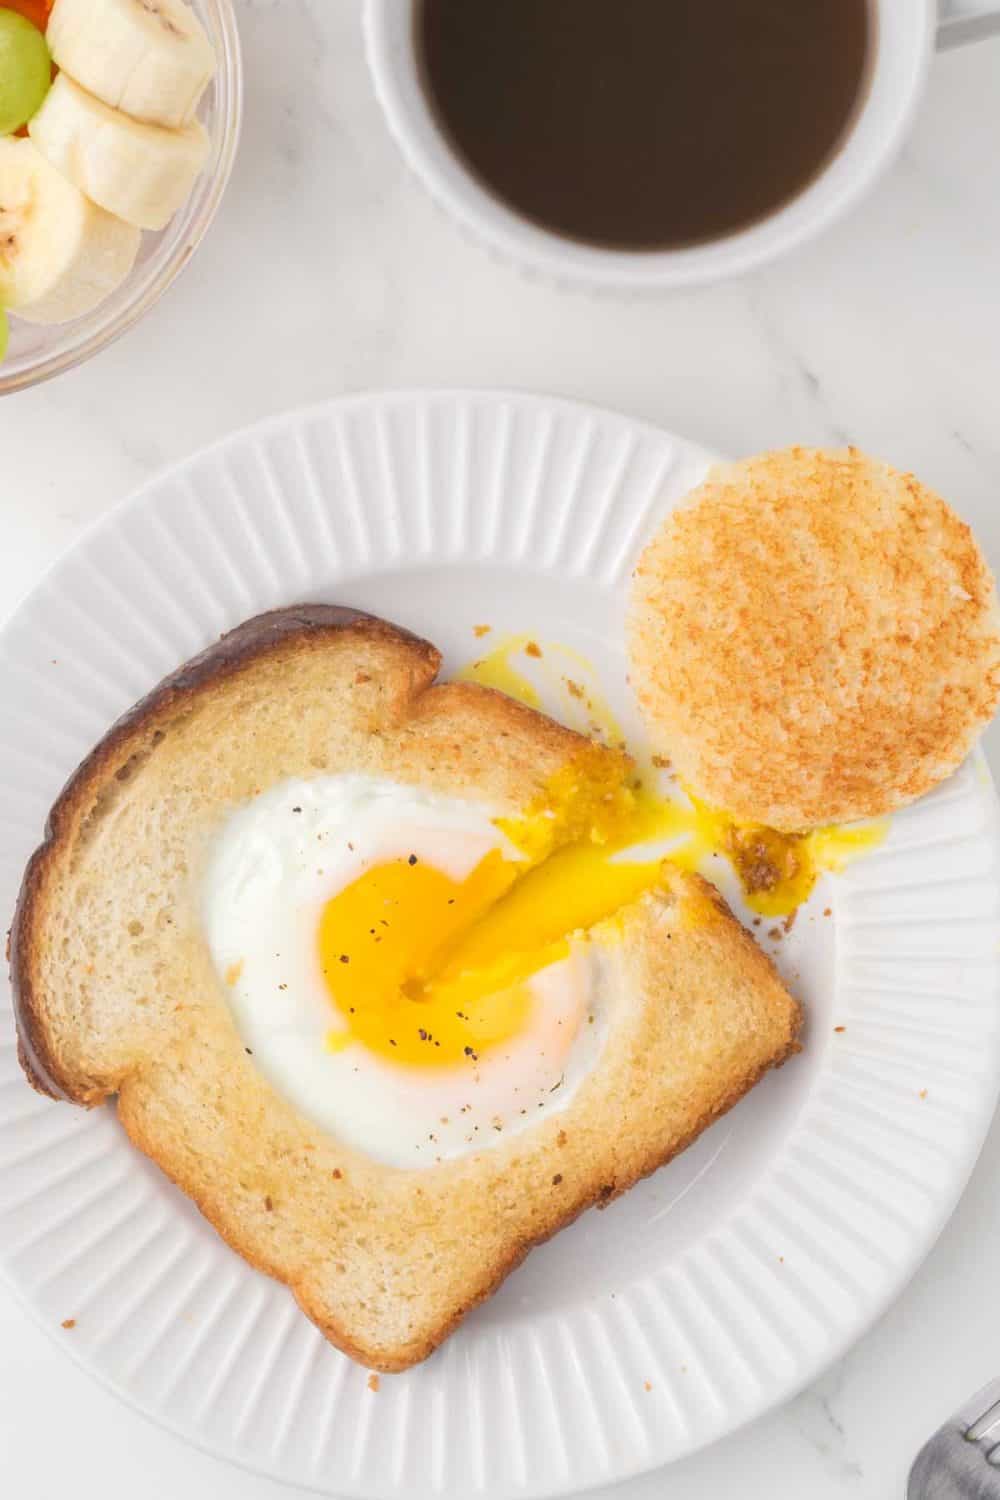 egg fried in a hole of toast with oranges and coffee